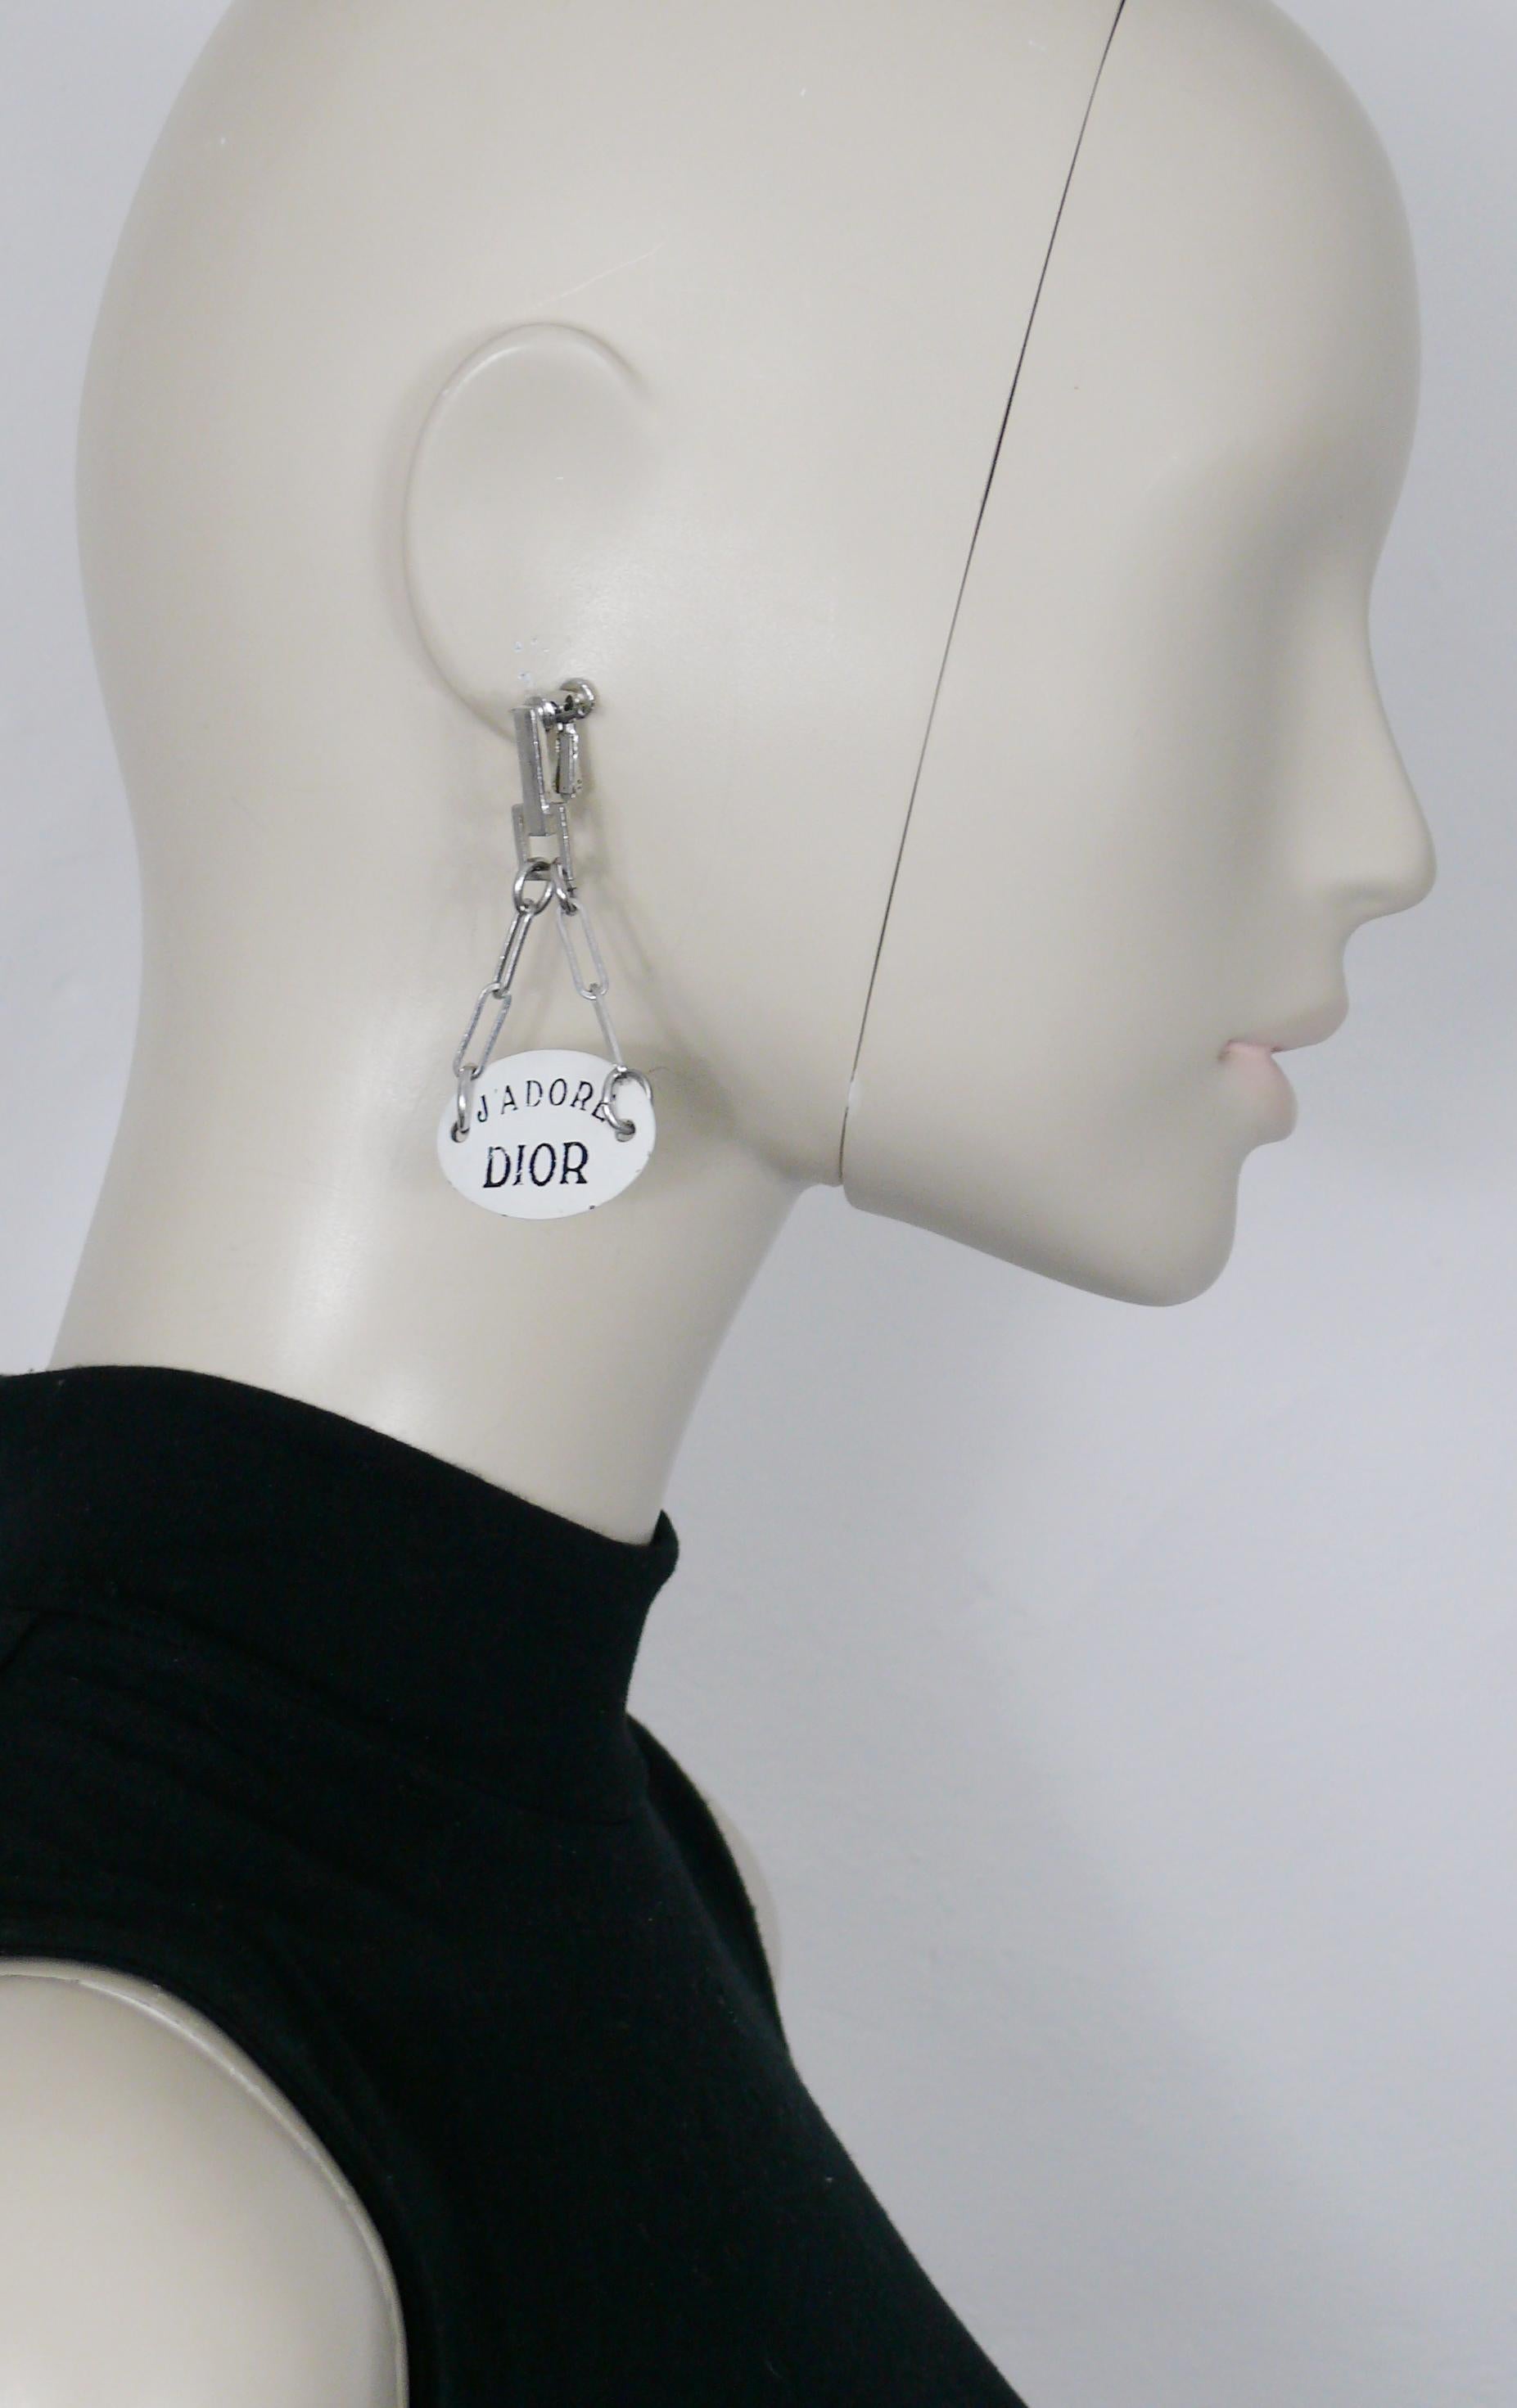 CHRISTIAN DIOR vintage dangling earrings (screw clip-on) featuring a large white enamel oval plate with black lettering 